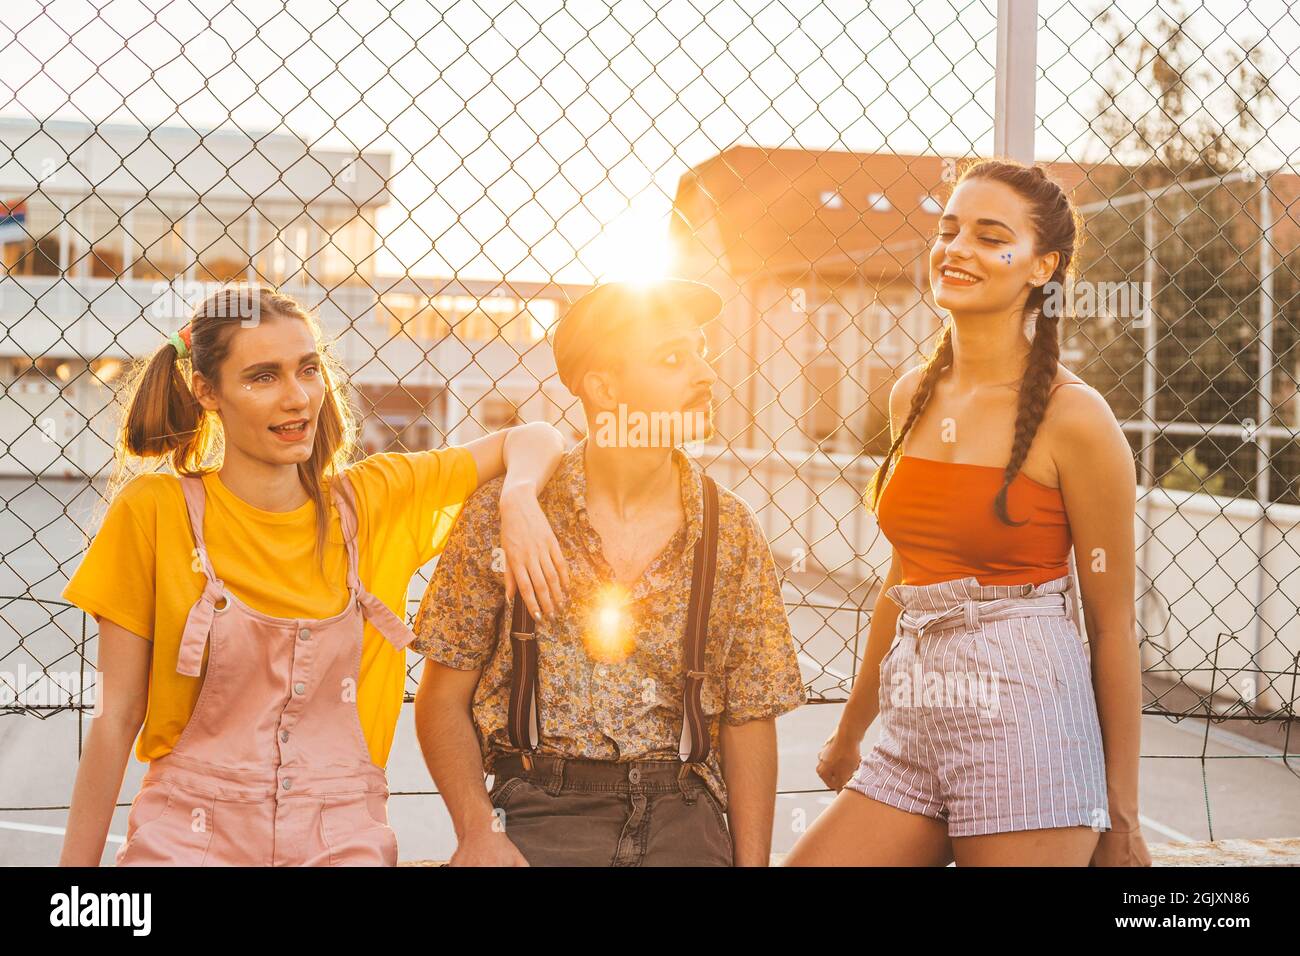 Group of teen friends hanging out together. Boy between two girls Stock Photo